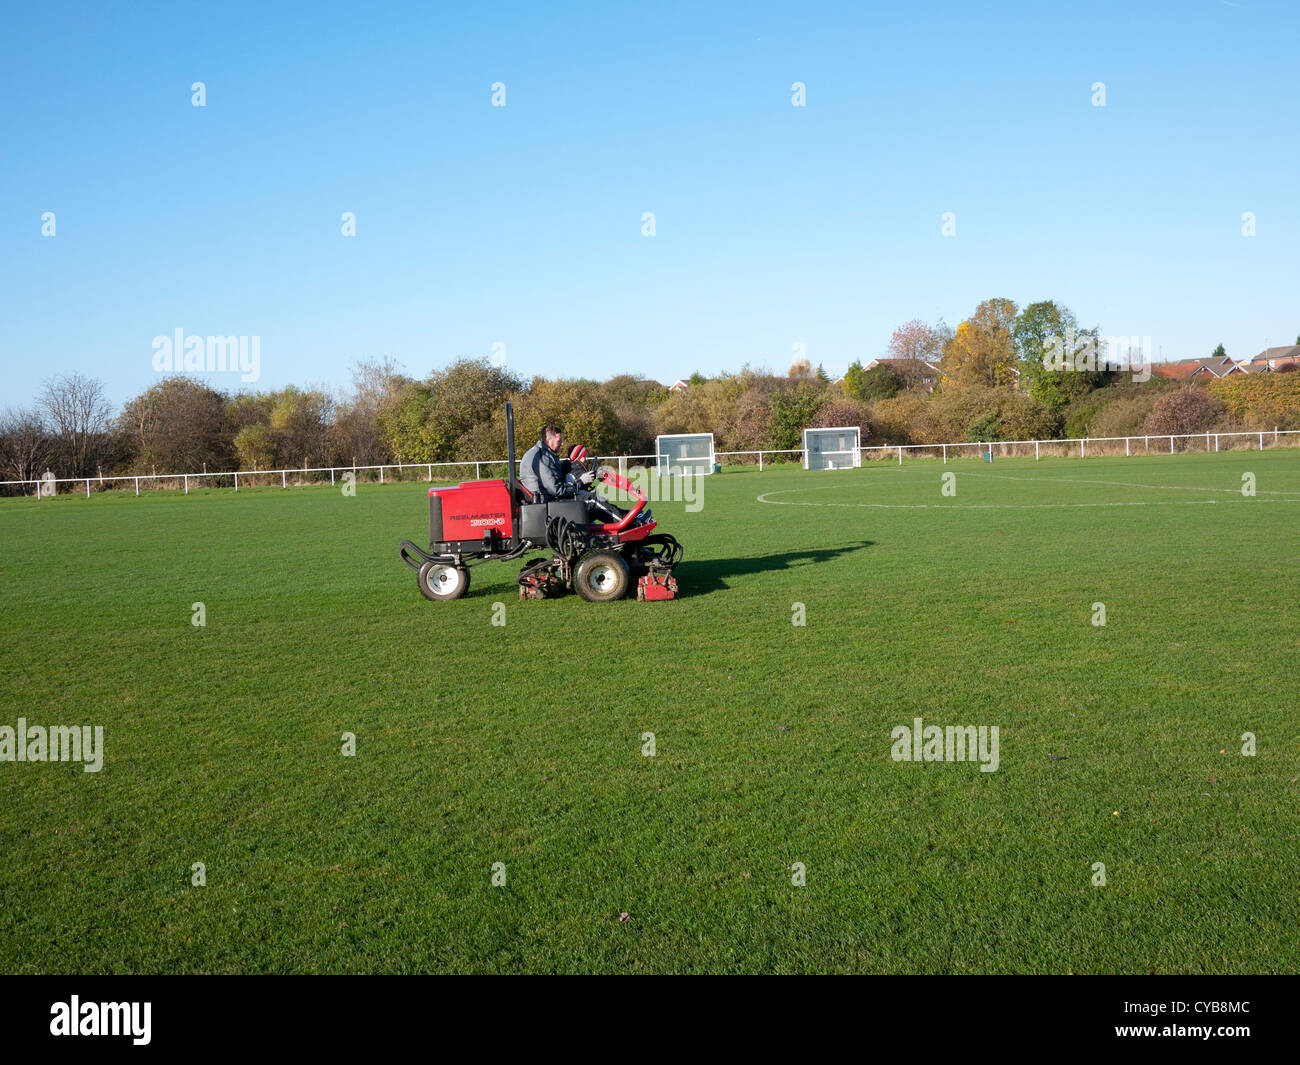 Man trimming football pitch with an industrial Mower, England, UK. Stock Photo